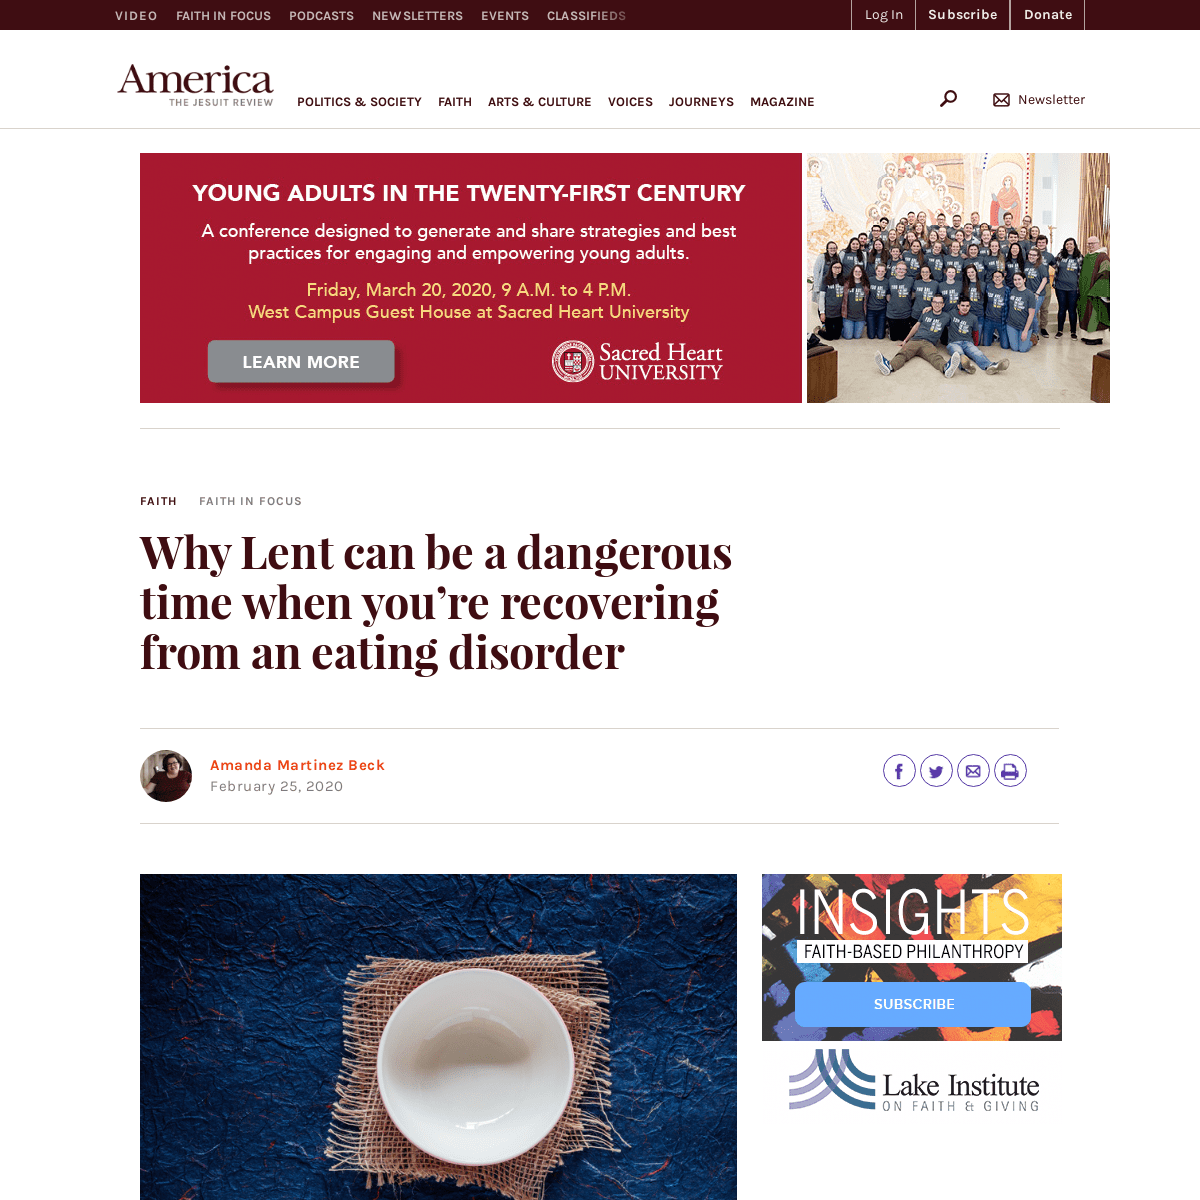 A complete backup of www.americamagazine.org/faith/2020/02/25/why-lent-can-be-dangerous-time-when-youre-recovering-eating-disord